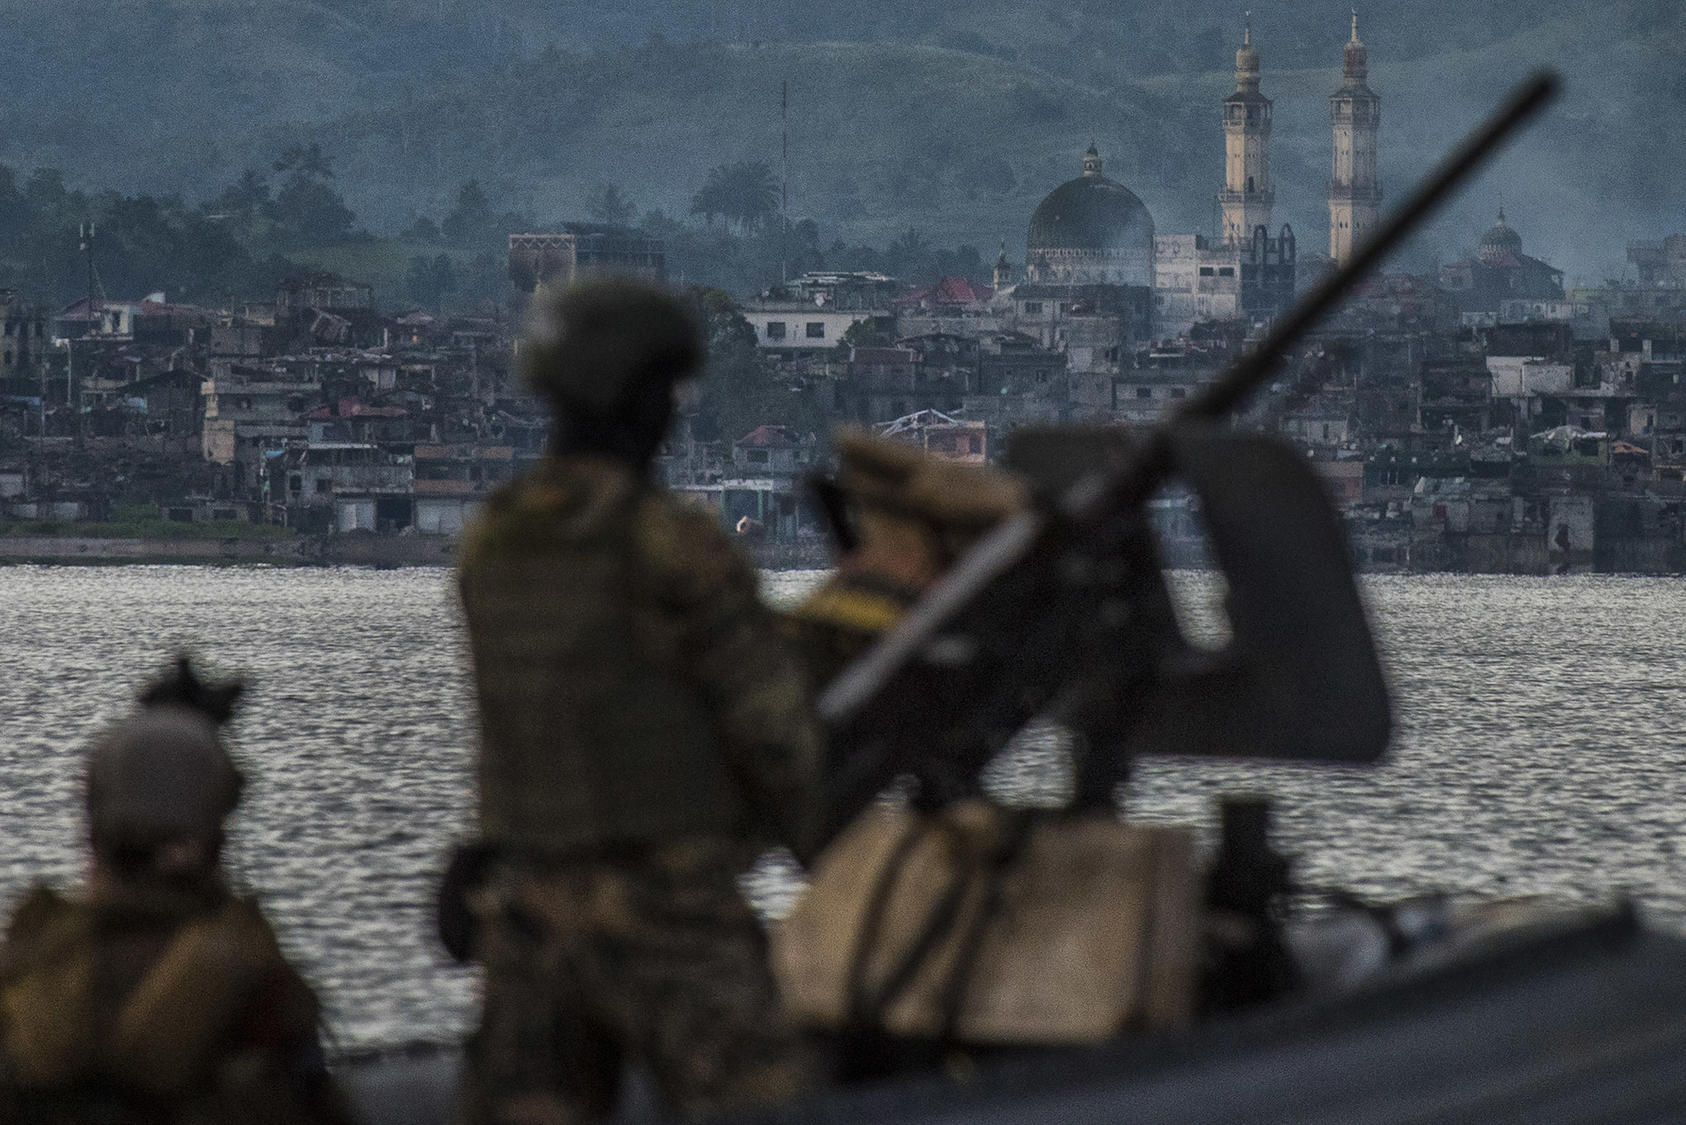 Philippines Navy Special Forces patrol a lake near the main battle area where Islamic State militants are holed up in Marawi, Philippines. September 15, 2017. (Jes Aznar/The New York Times)